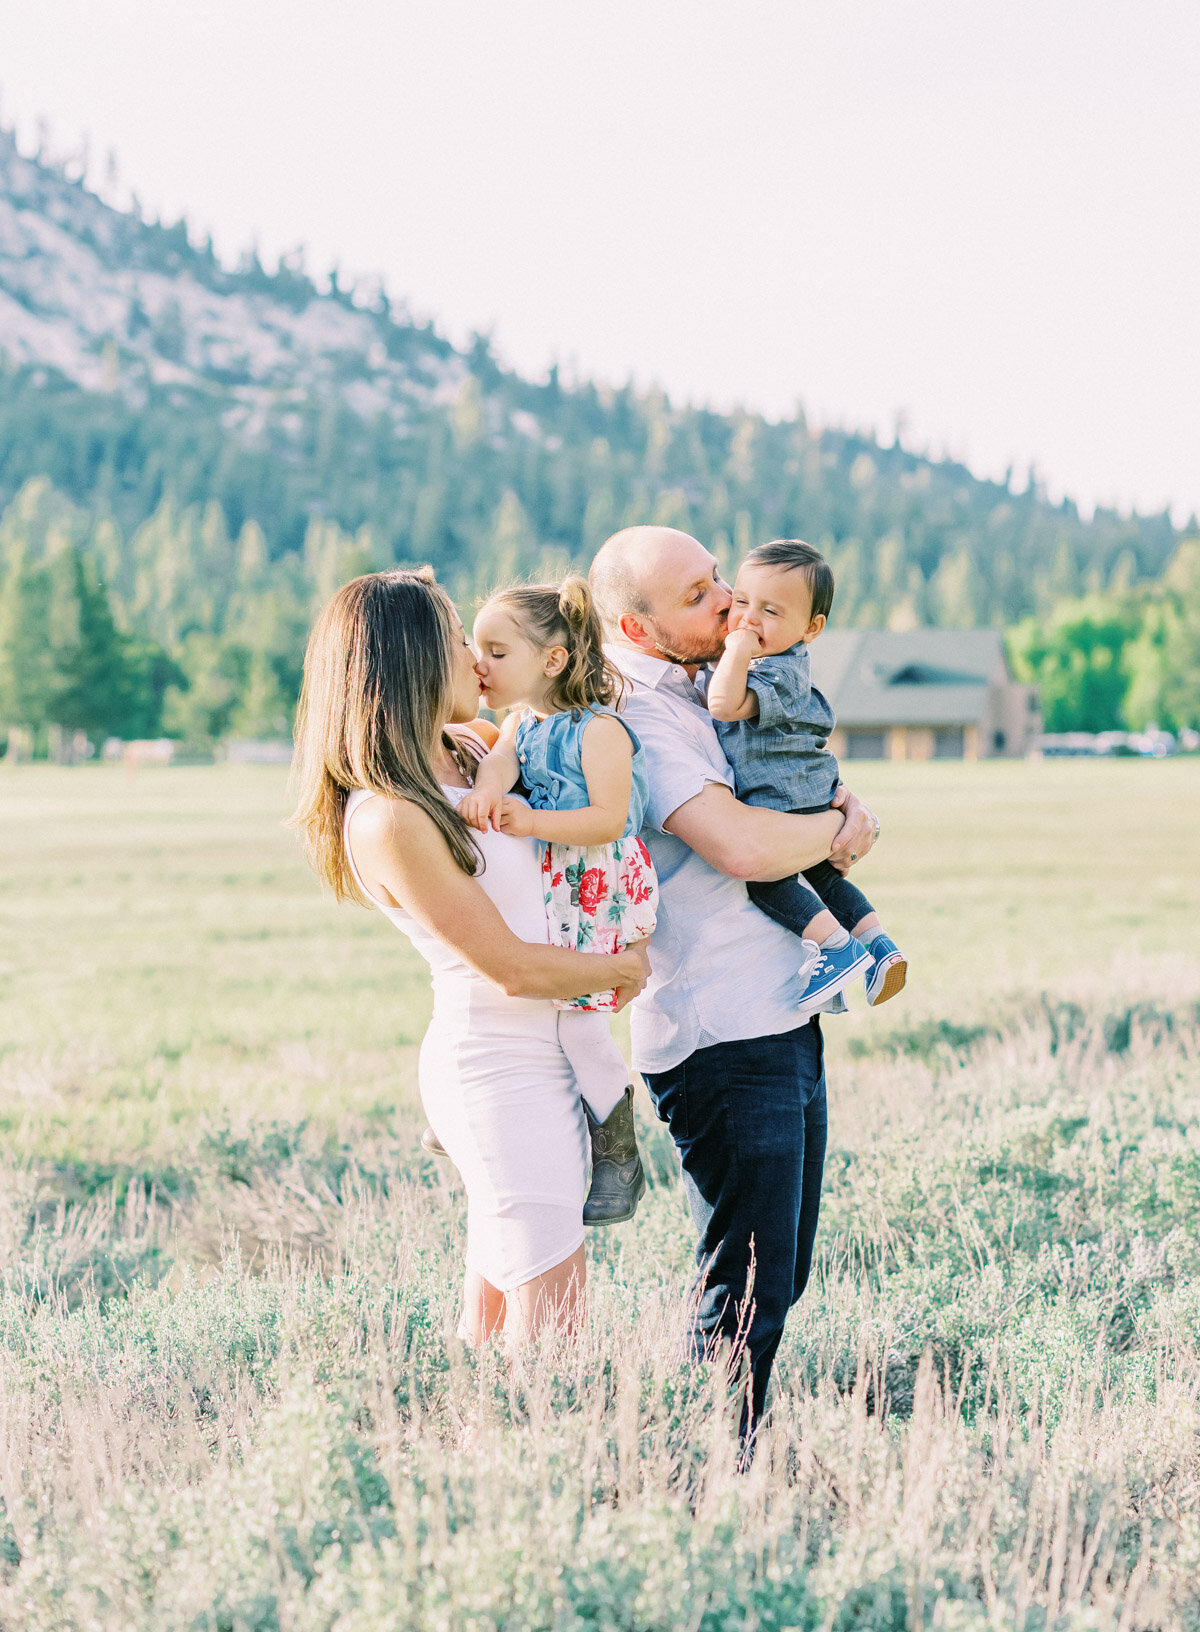 Meadow photo session in Lake Tahoe